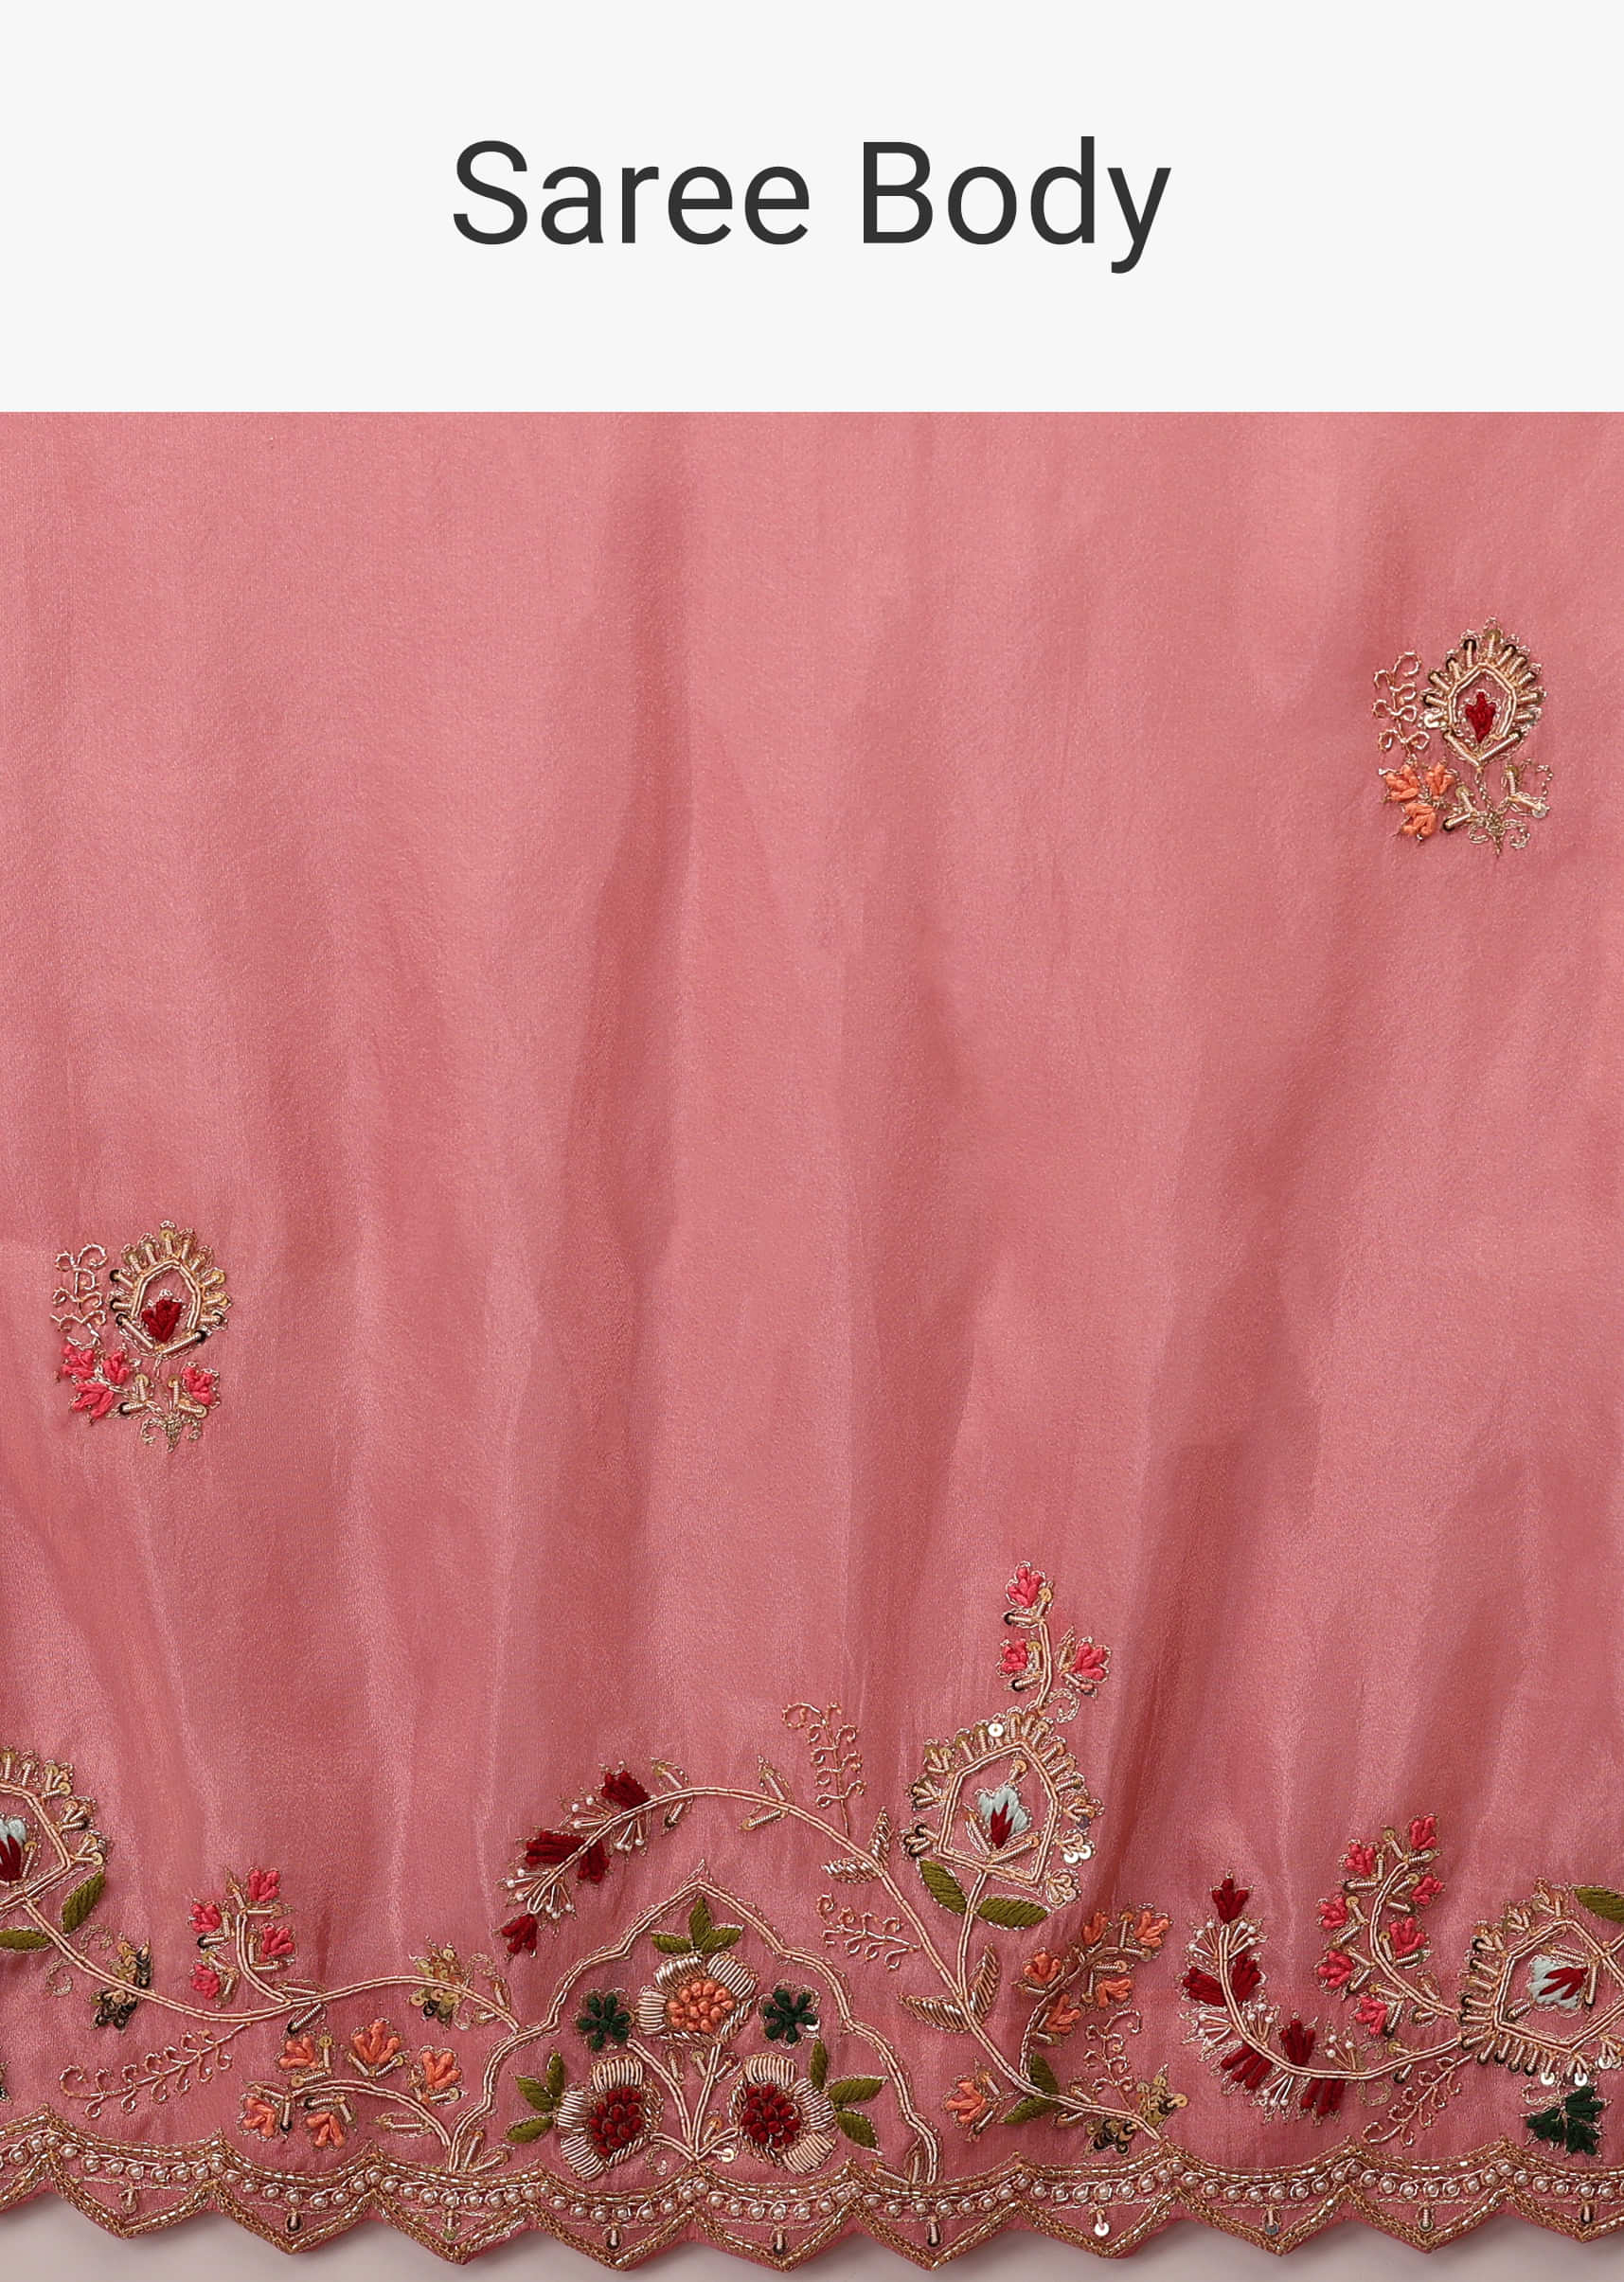 Blush Pink Tissue Saree In Pink French Knots And Zardozi Embroidery Buttiis, Embroidery Detailing Work On Border